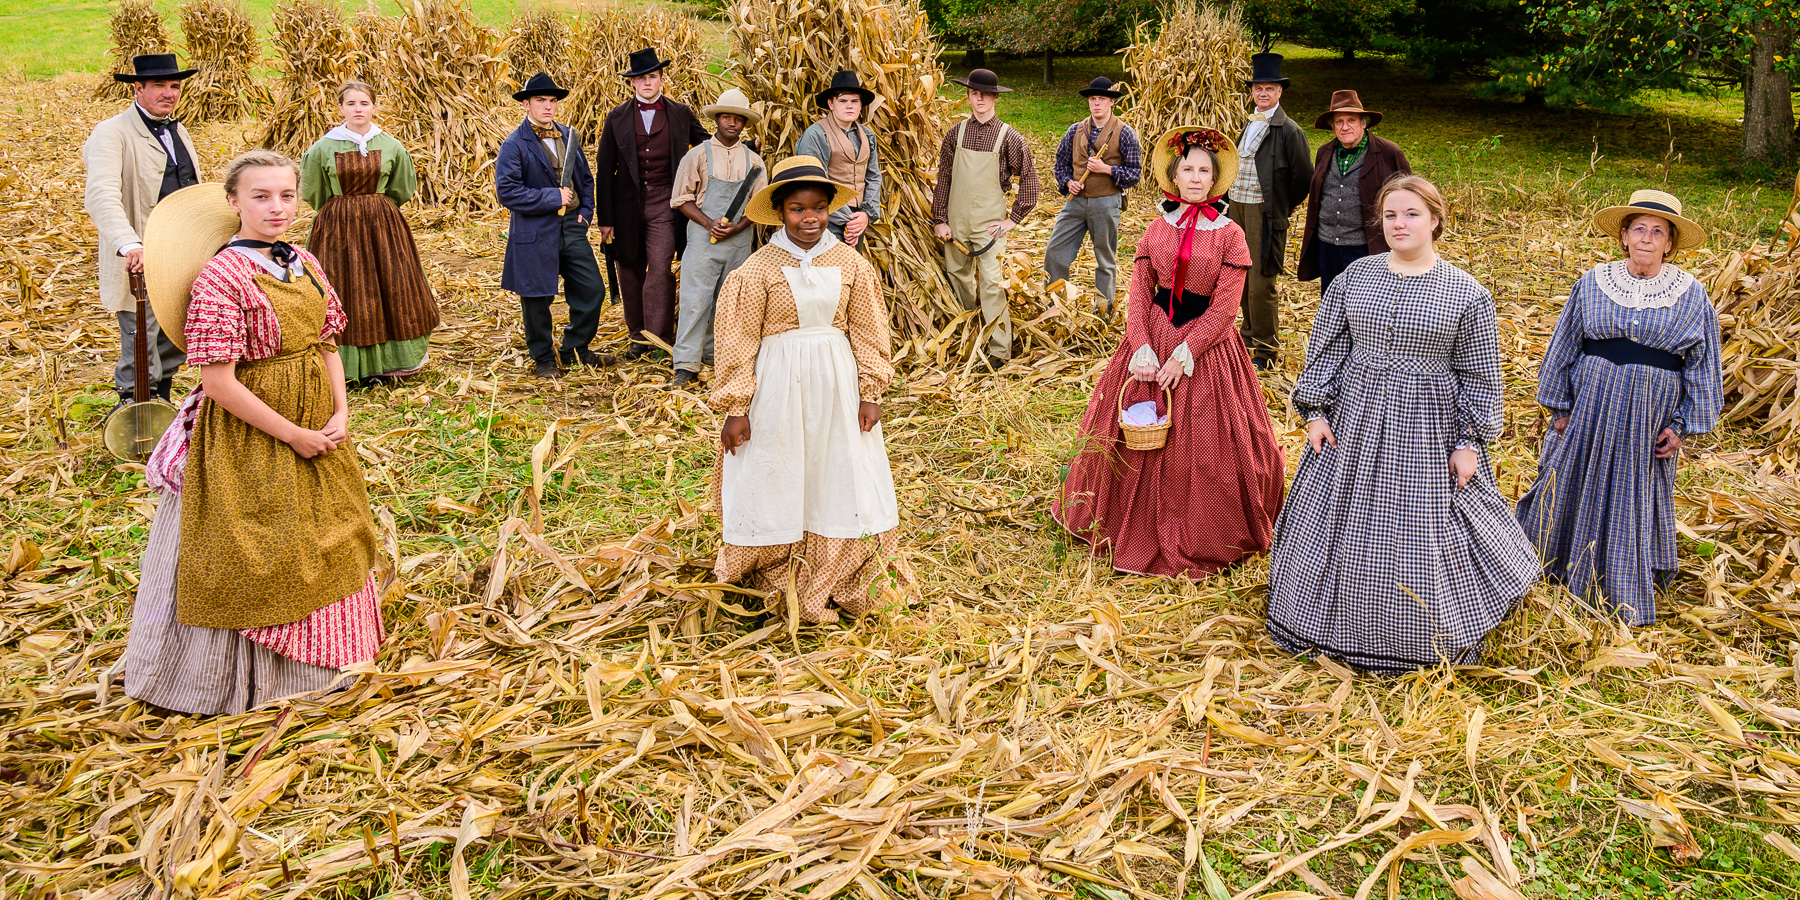 A group of living historians in 19th century clothing stand in a field of harvested corn.